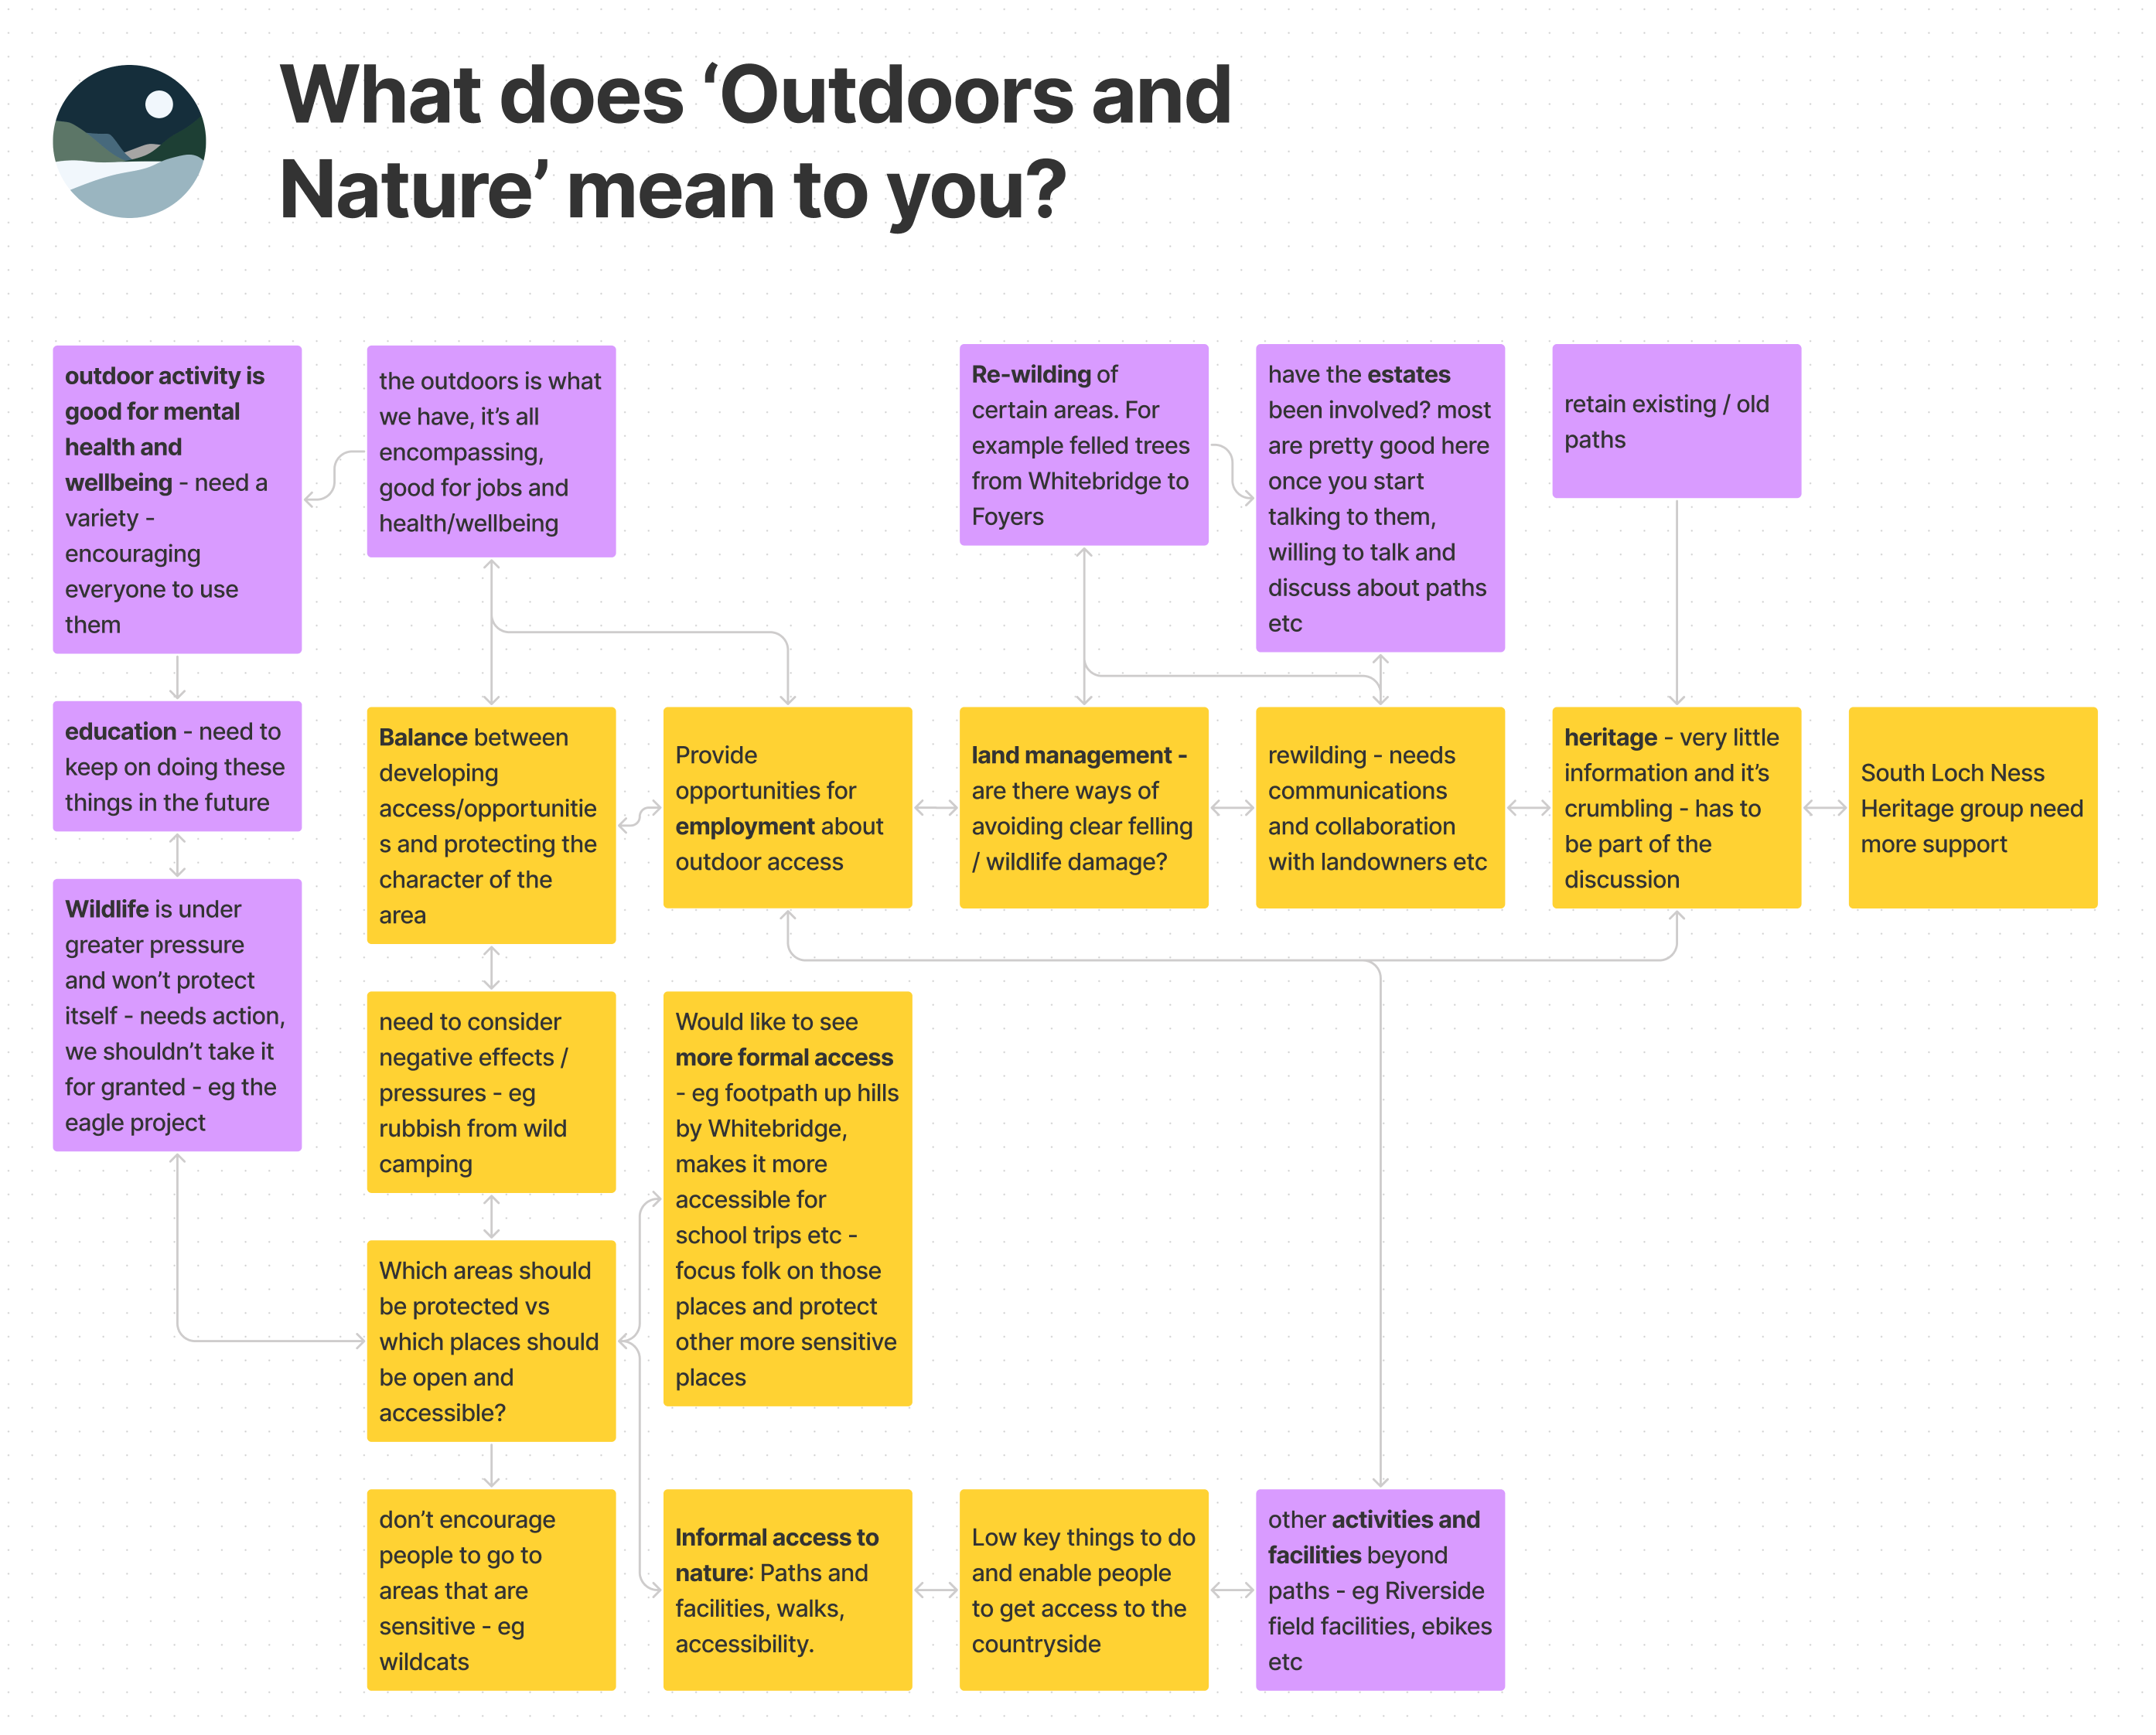 Outdoors and nature: workshop summary